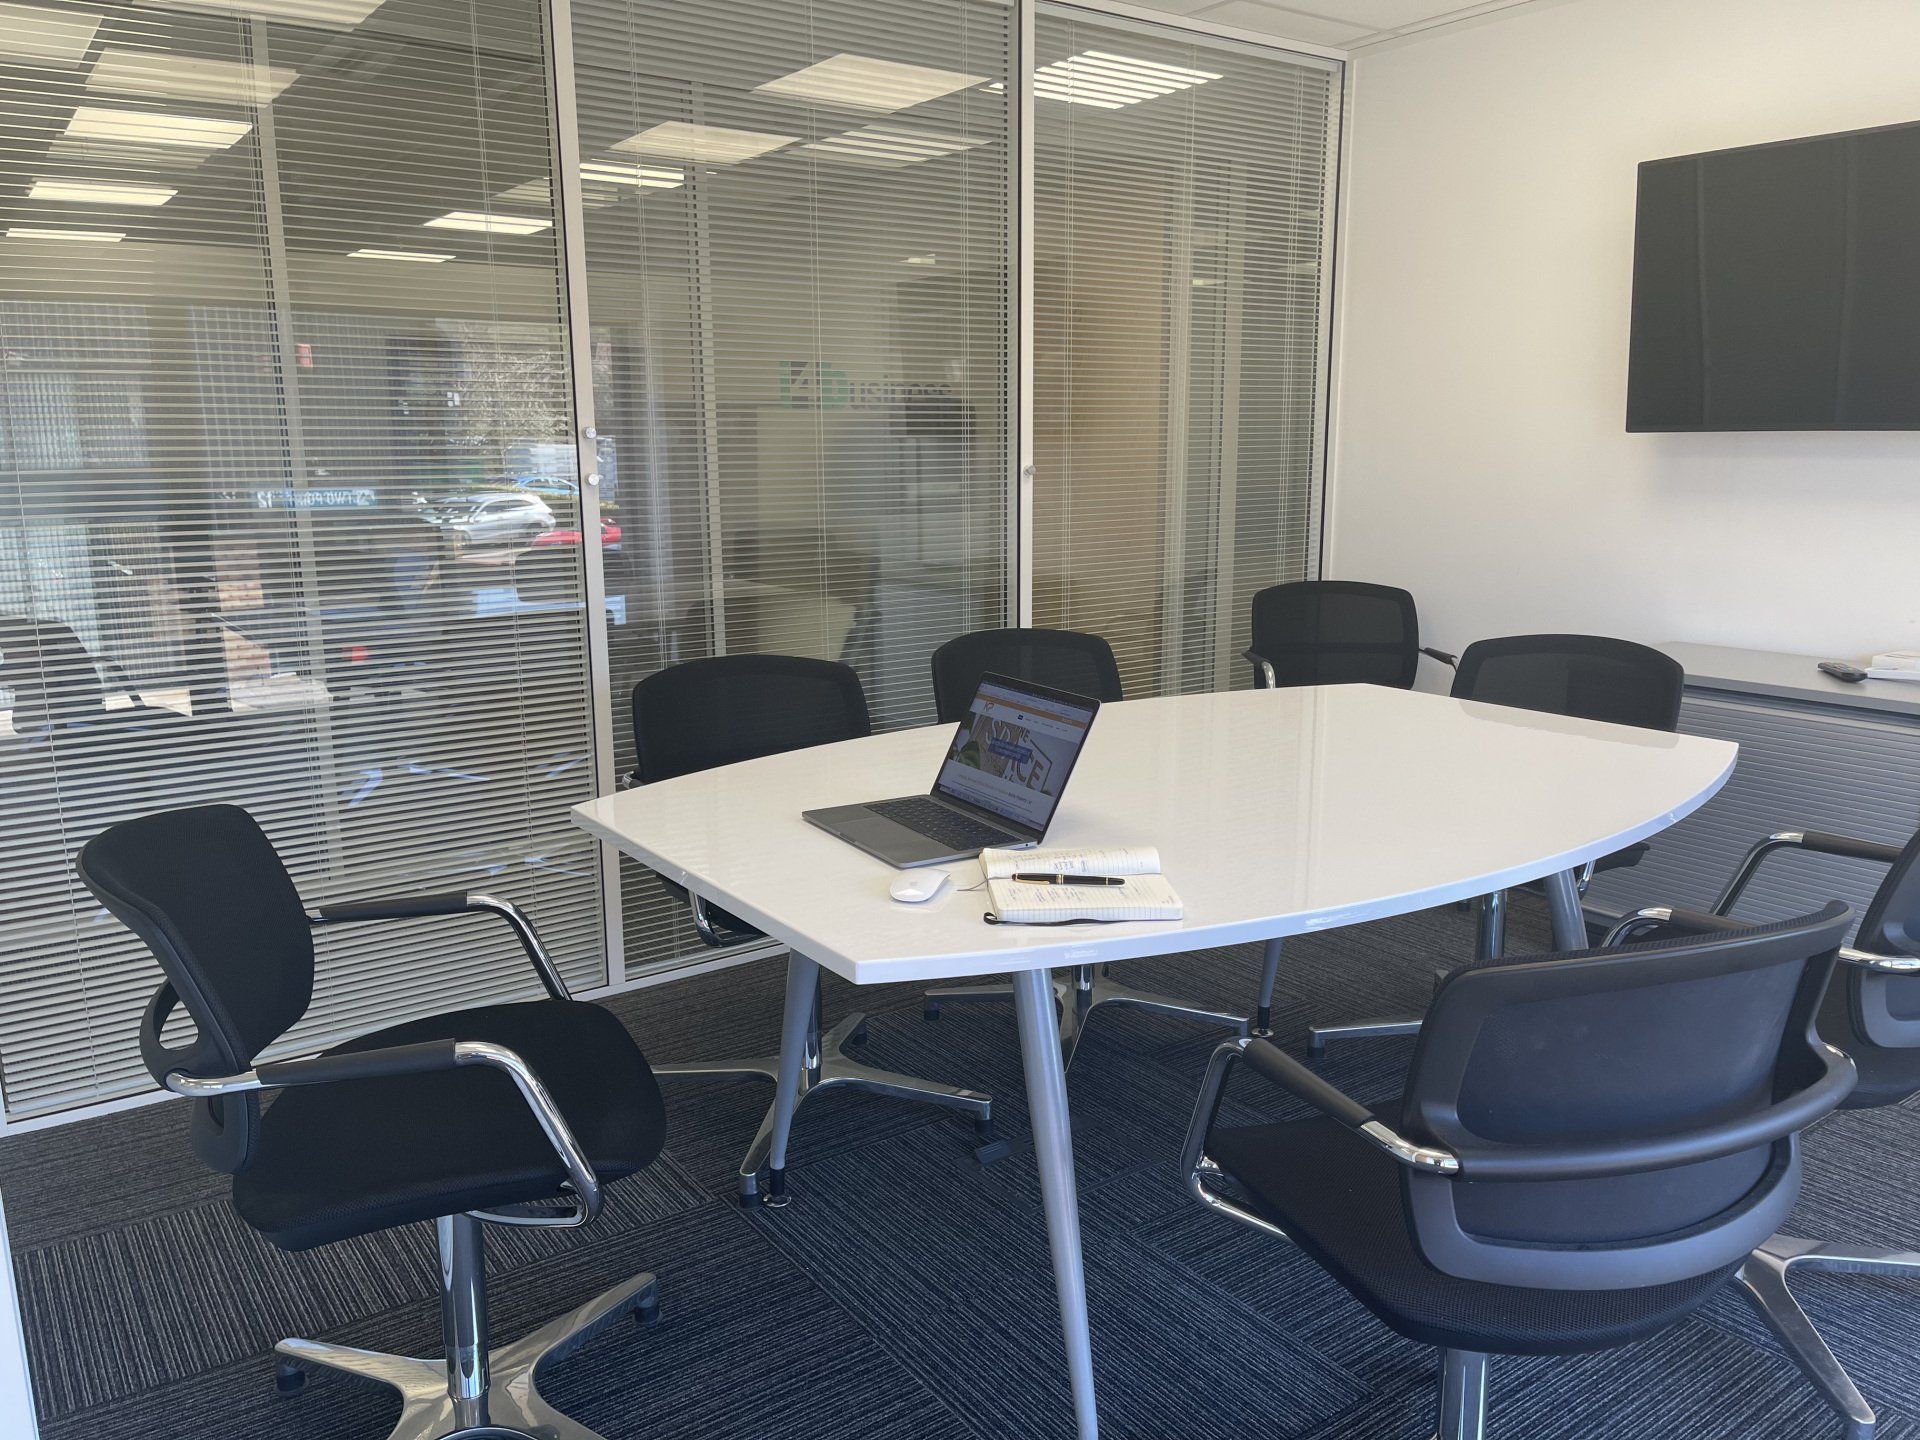 Meeting room for hire for an interview in Farnham Surrey